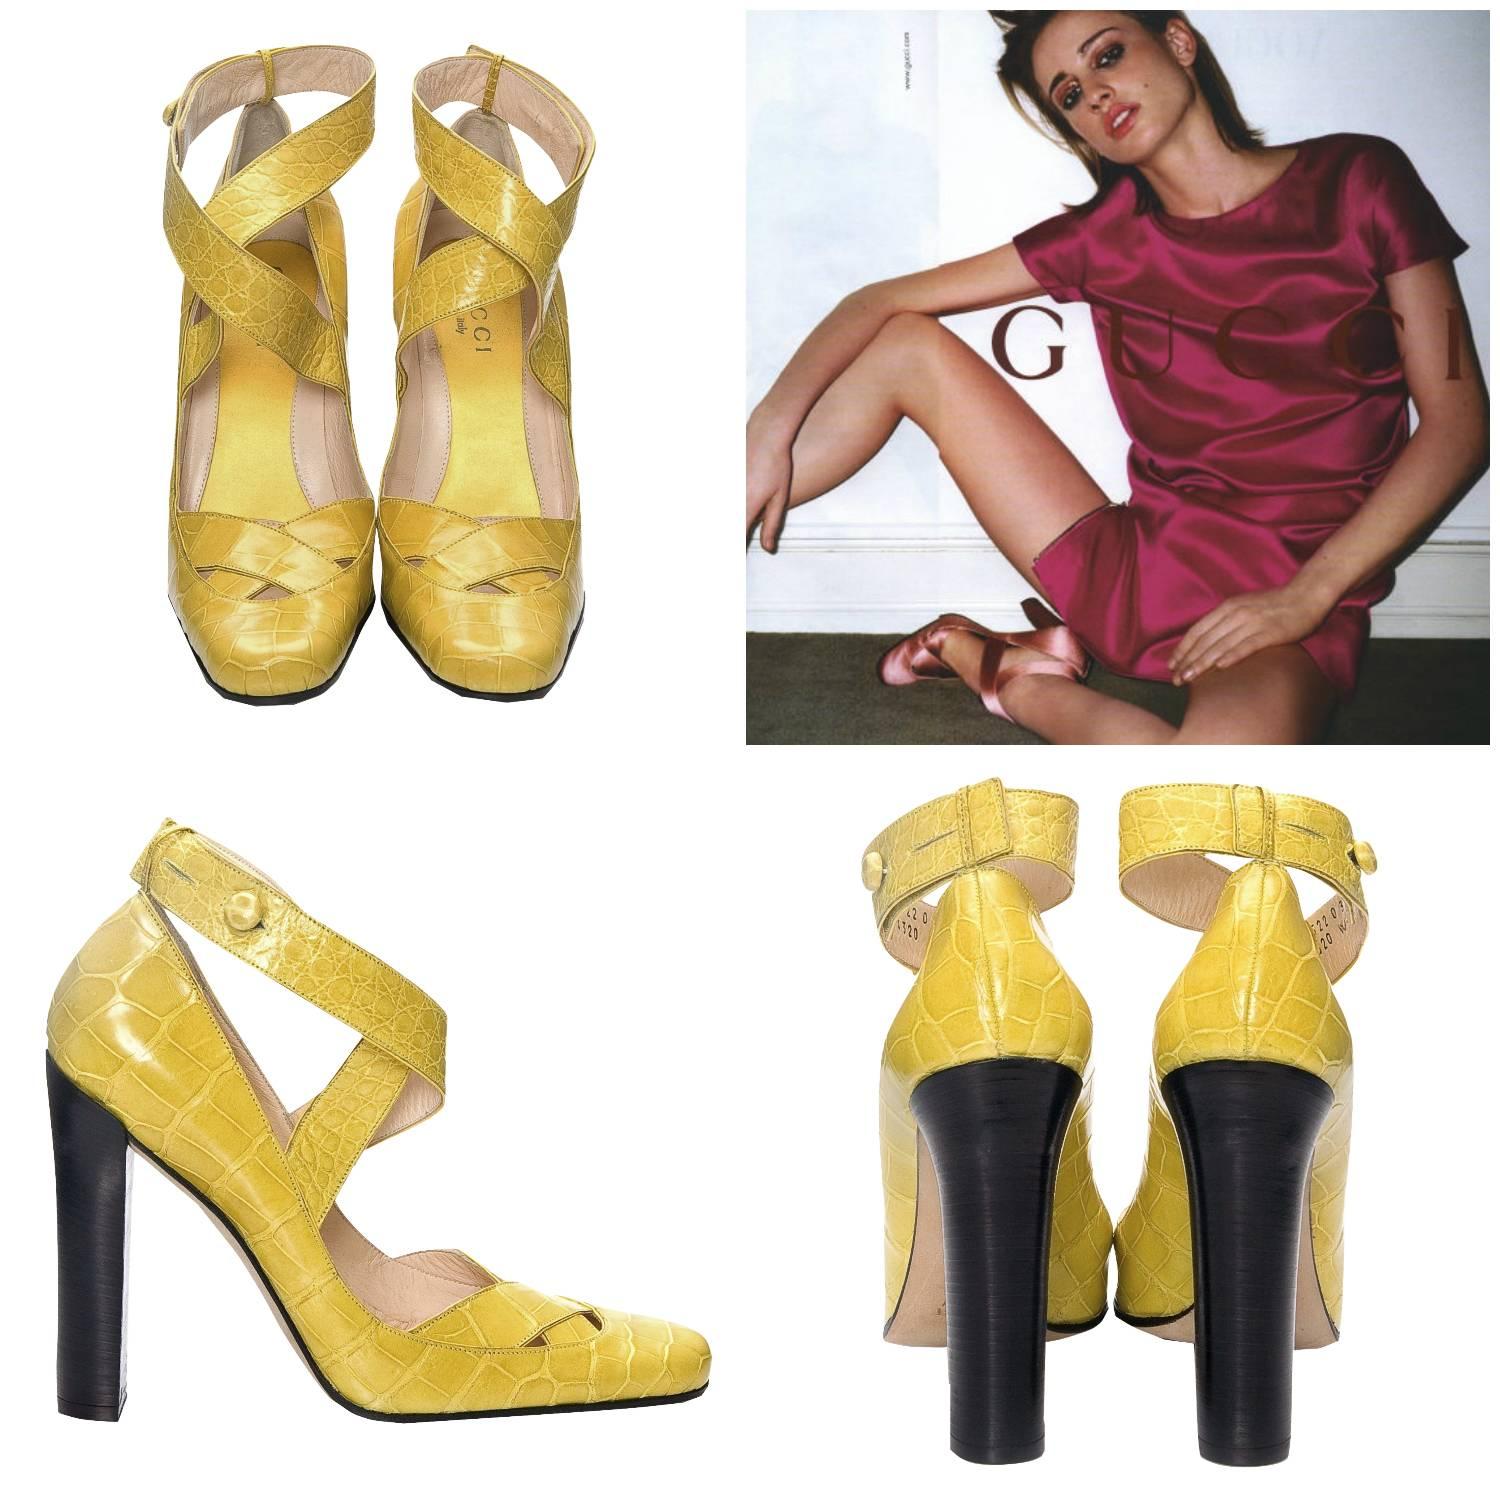 Tom Ford For Gucci Heels
Own a Piece of Fashion History
Brand New, Rare Collectible Ad Runway Heels
* Stunning in Yellow Genuine Crocodile 
* Tom Ford's Iconic Runway Heels
* Euro Size: 39 
* Adjustable Crocodile Ankle Strap
* Leather & Yellow Satin